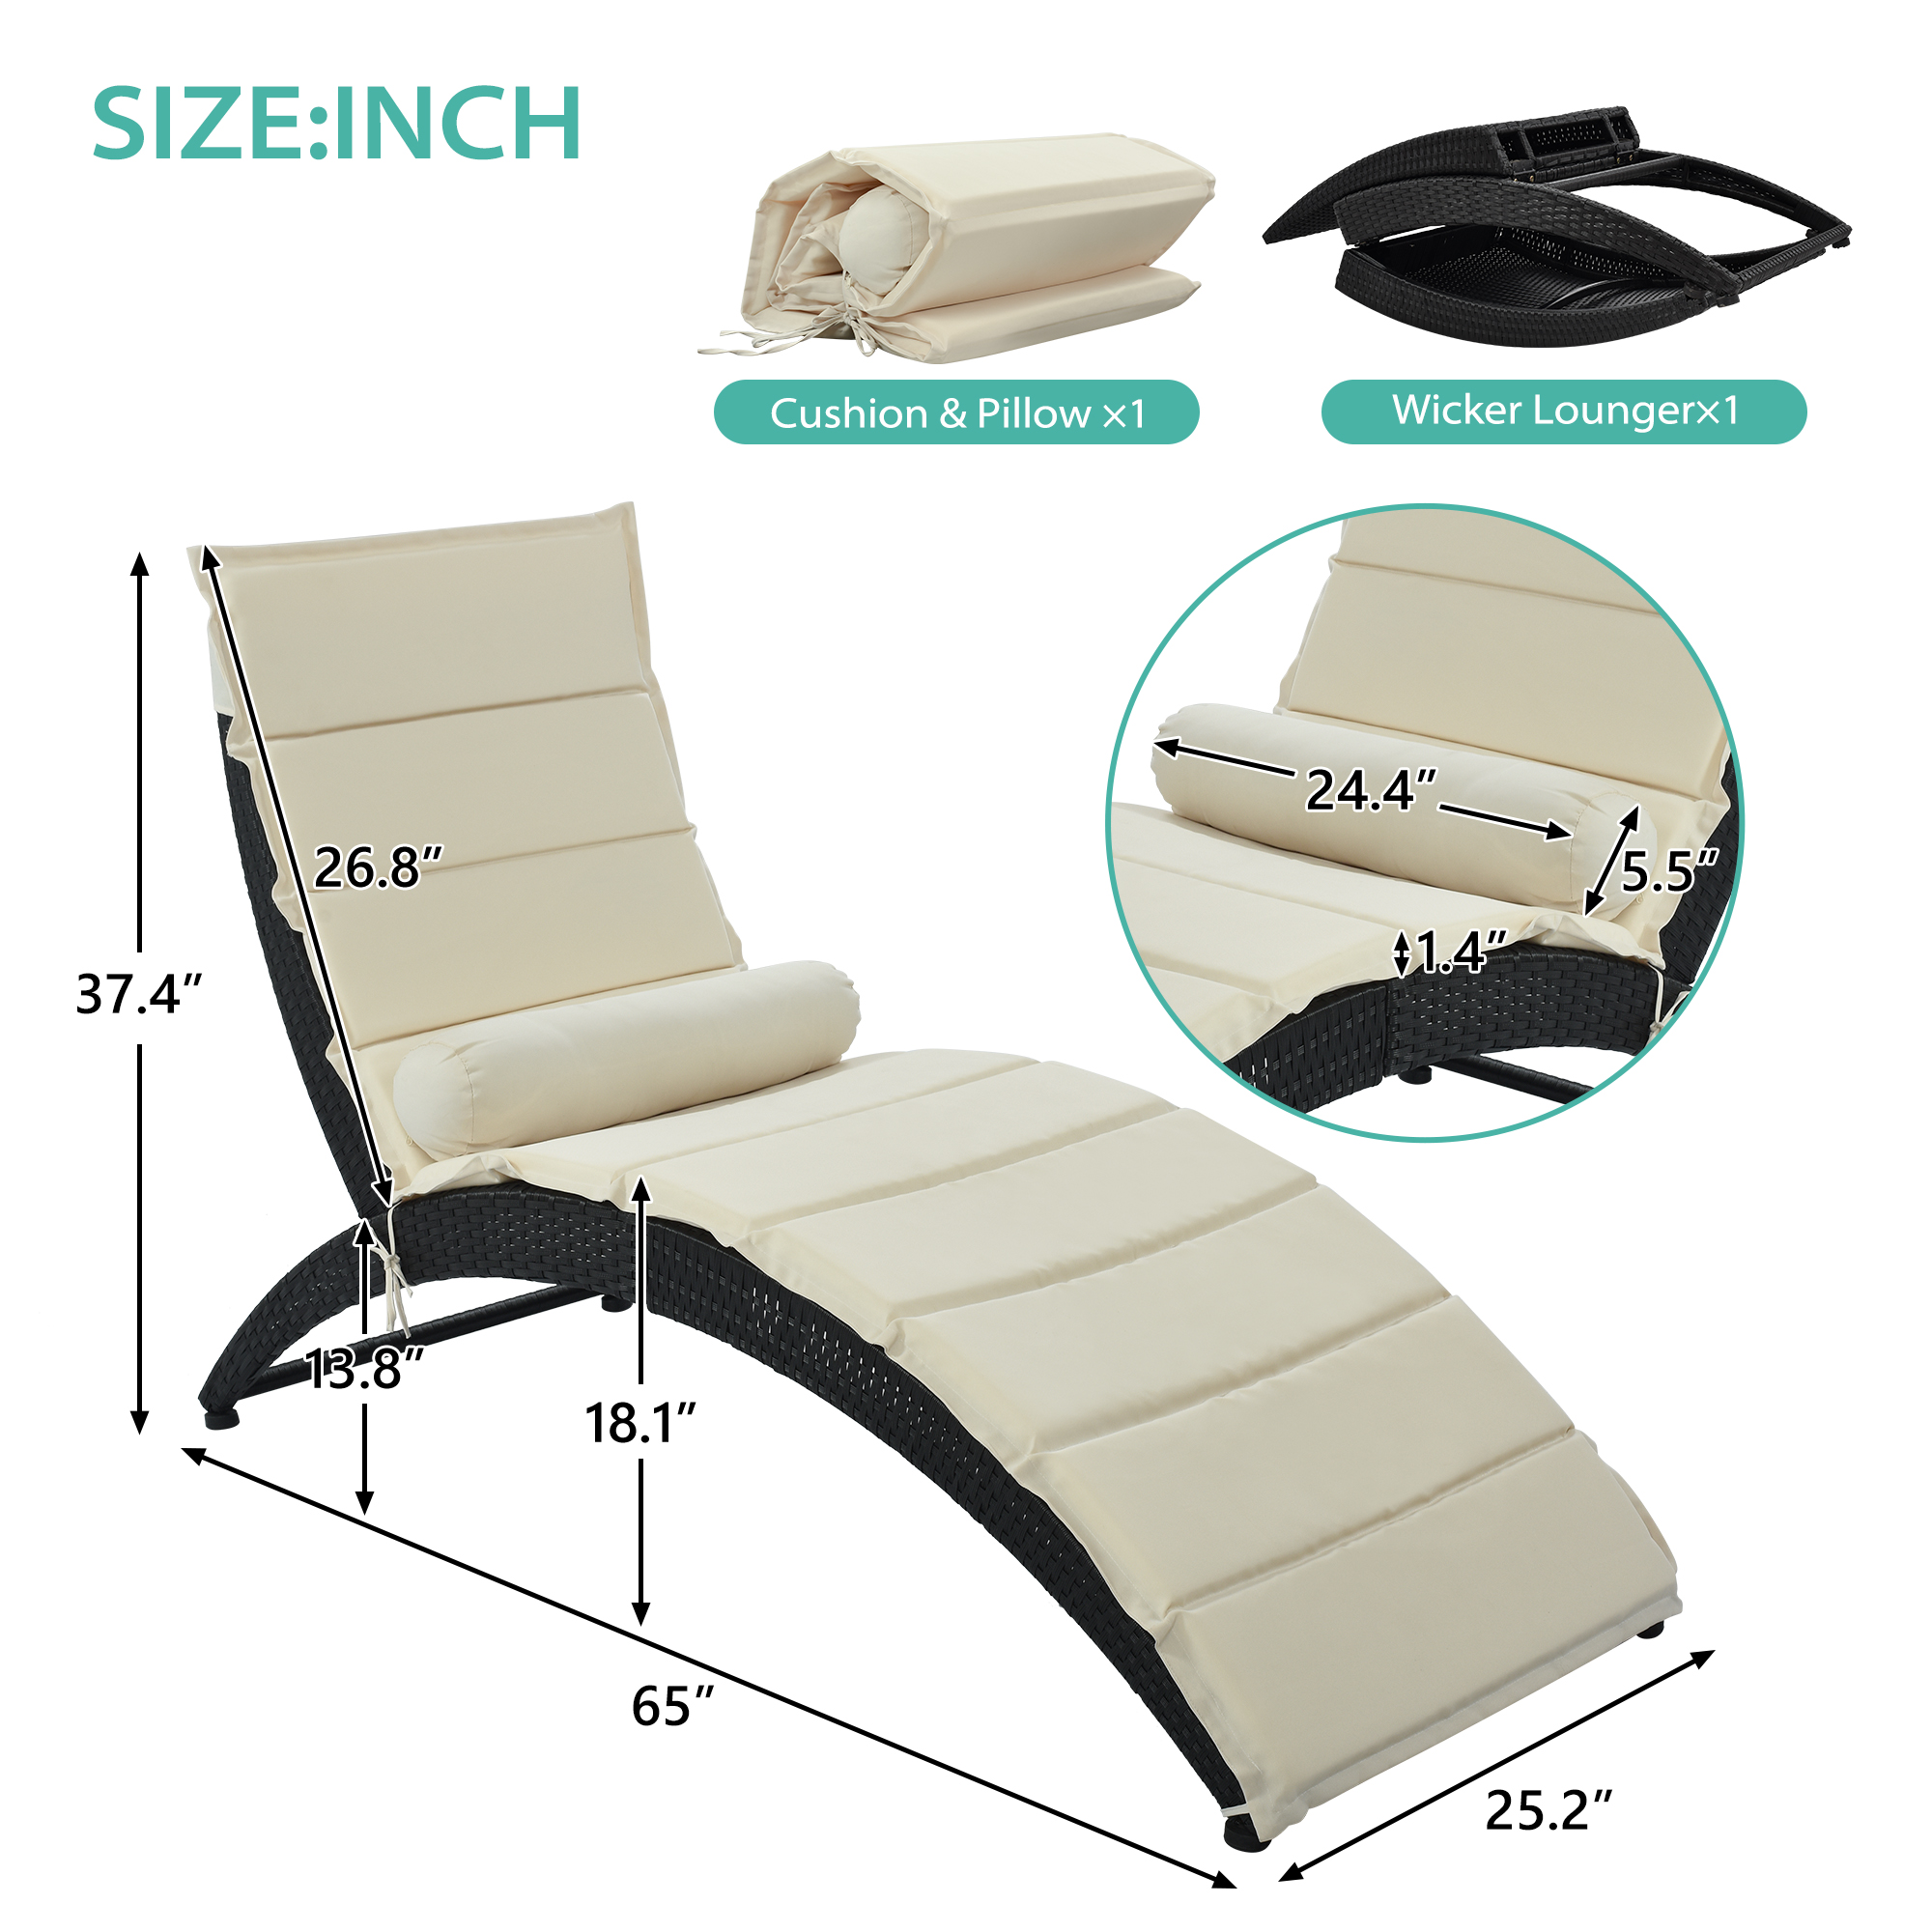 Outdoor Chaise Lounge Chair, Patio Reclining Sun Lounger, PE Wicker Rattan Foldable Lounge Chair with Steel Frame, Cushions, and Bolster Pillow, Reclining Chair for Poolside, Deck, Backyard, Beige - image 5 of 10